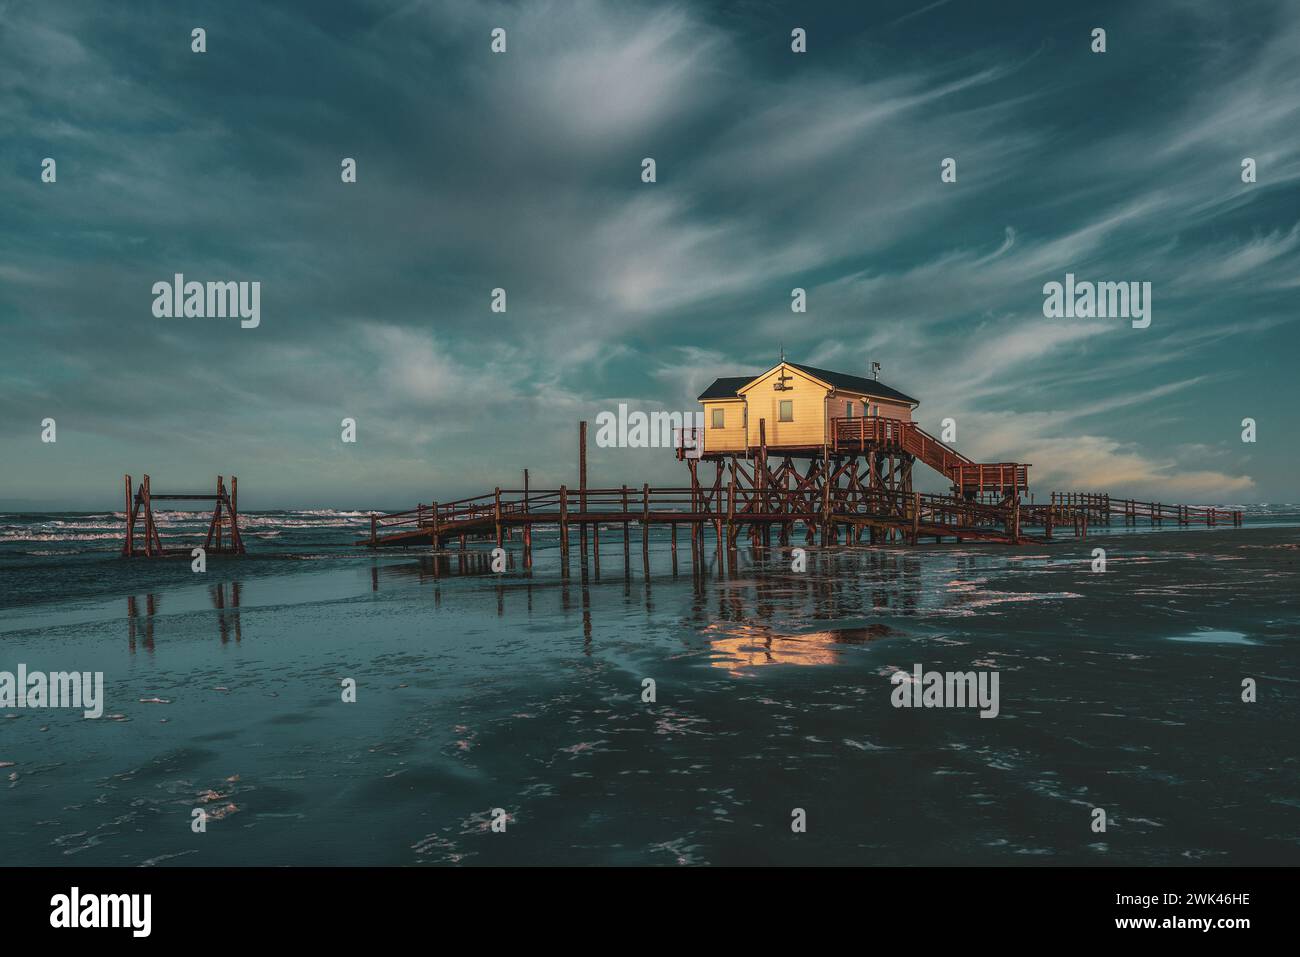 Pile dwelling on the beach of Sankt Peter-Ording in Germany. Stock Photo